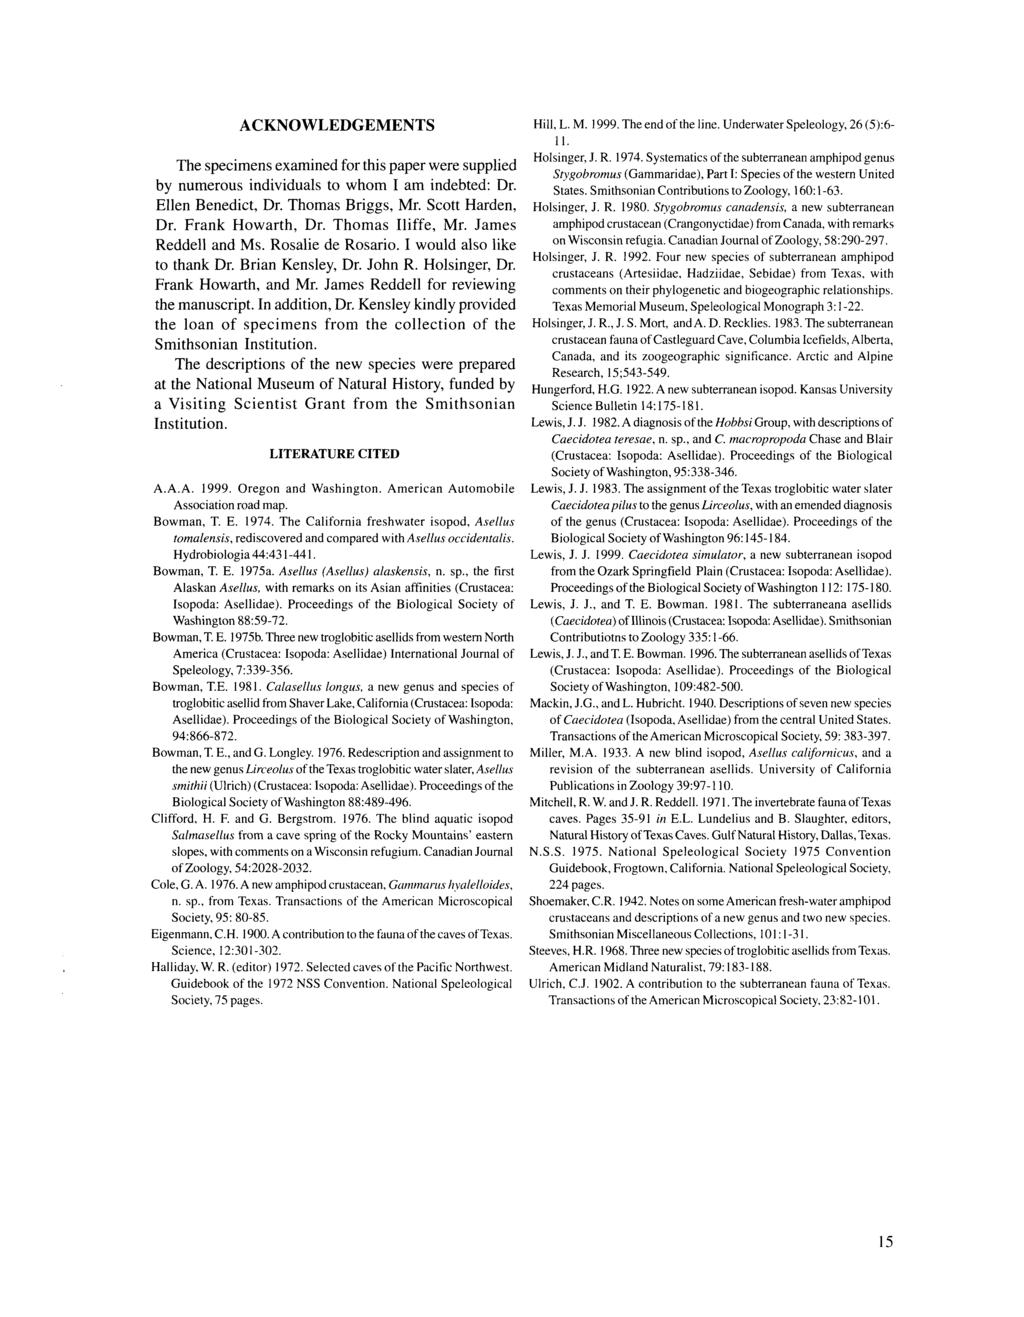 ACKNOWLEDGEMENTS The specimens examined for this paper were supplied by numerous individuals to whom I am indebted: Dr. Ellen Benedict, Dr. Thomas Briggs, Mr. Scott Harden, Dr. Frank Howarth, Dr.